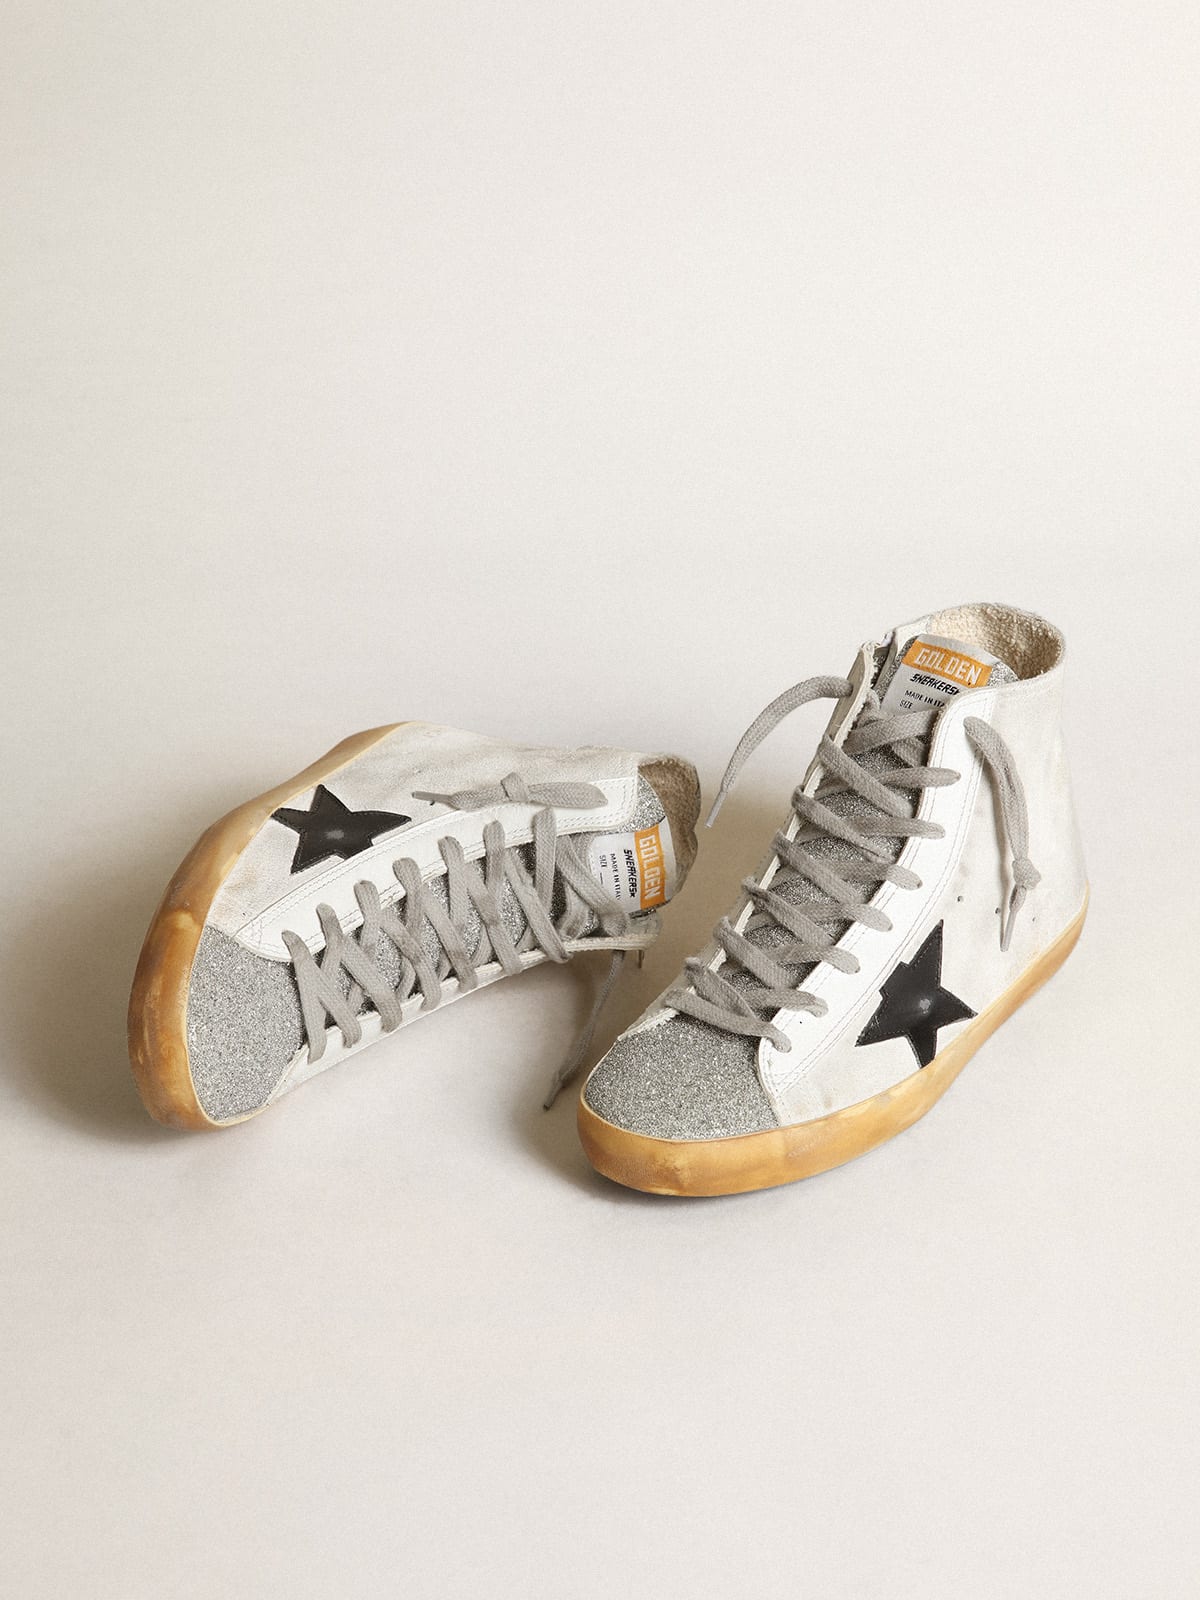 Golden Goose - Women's Francy in white suede with black leather star in 